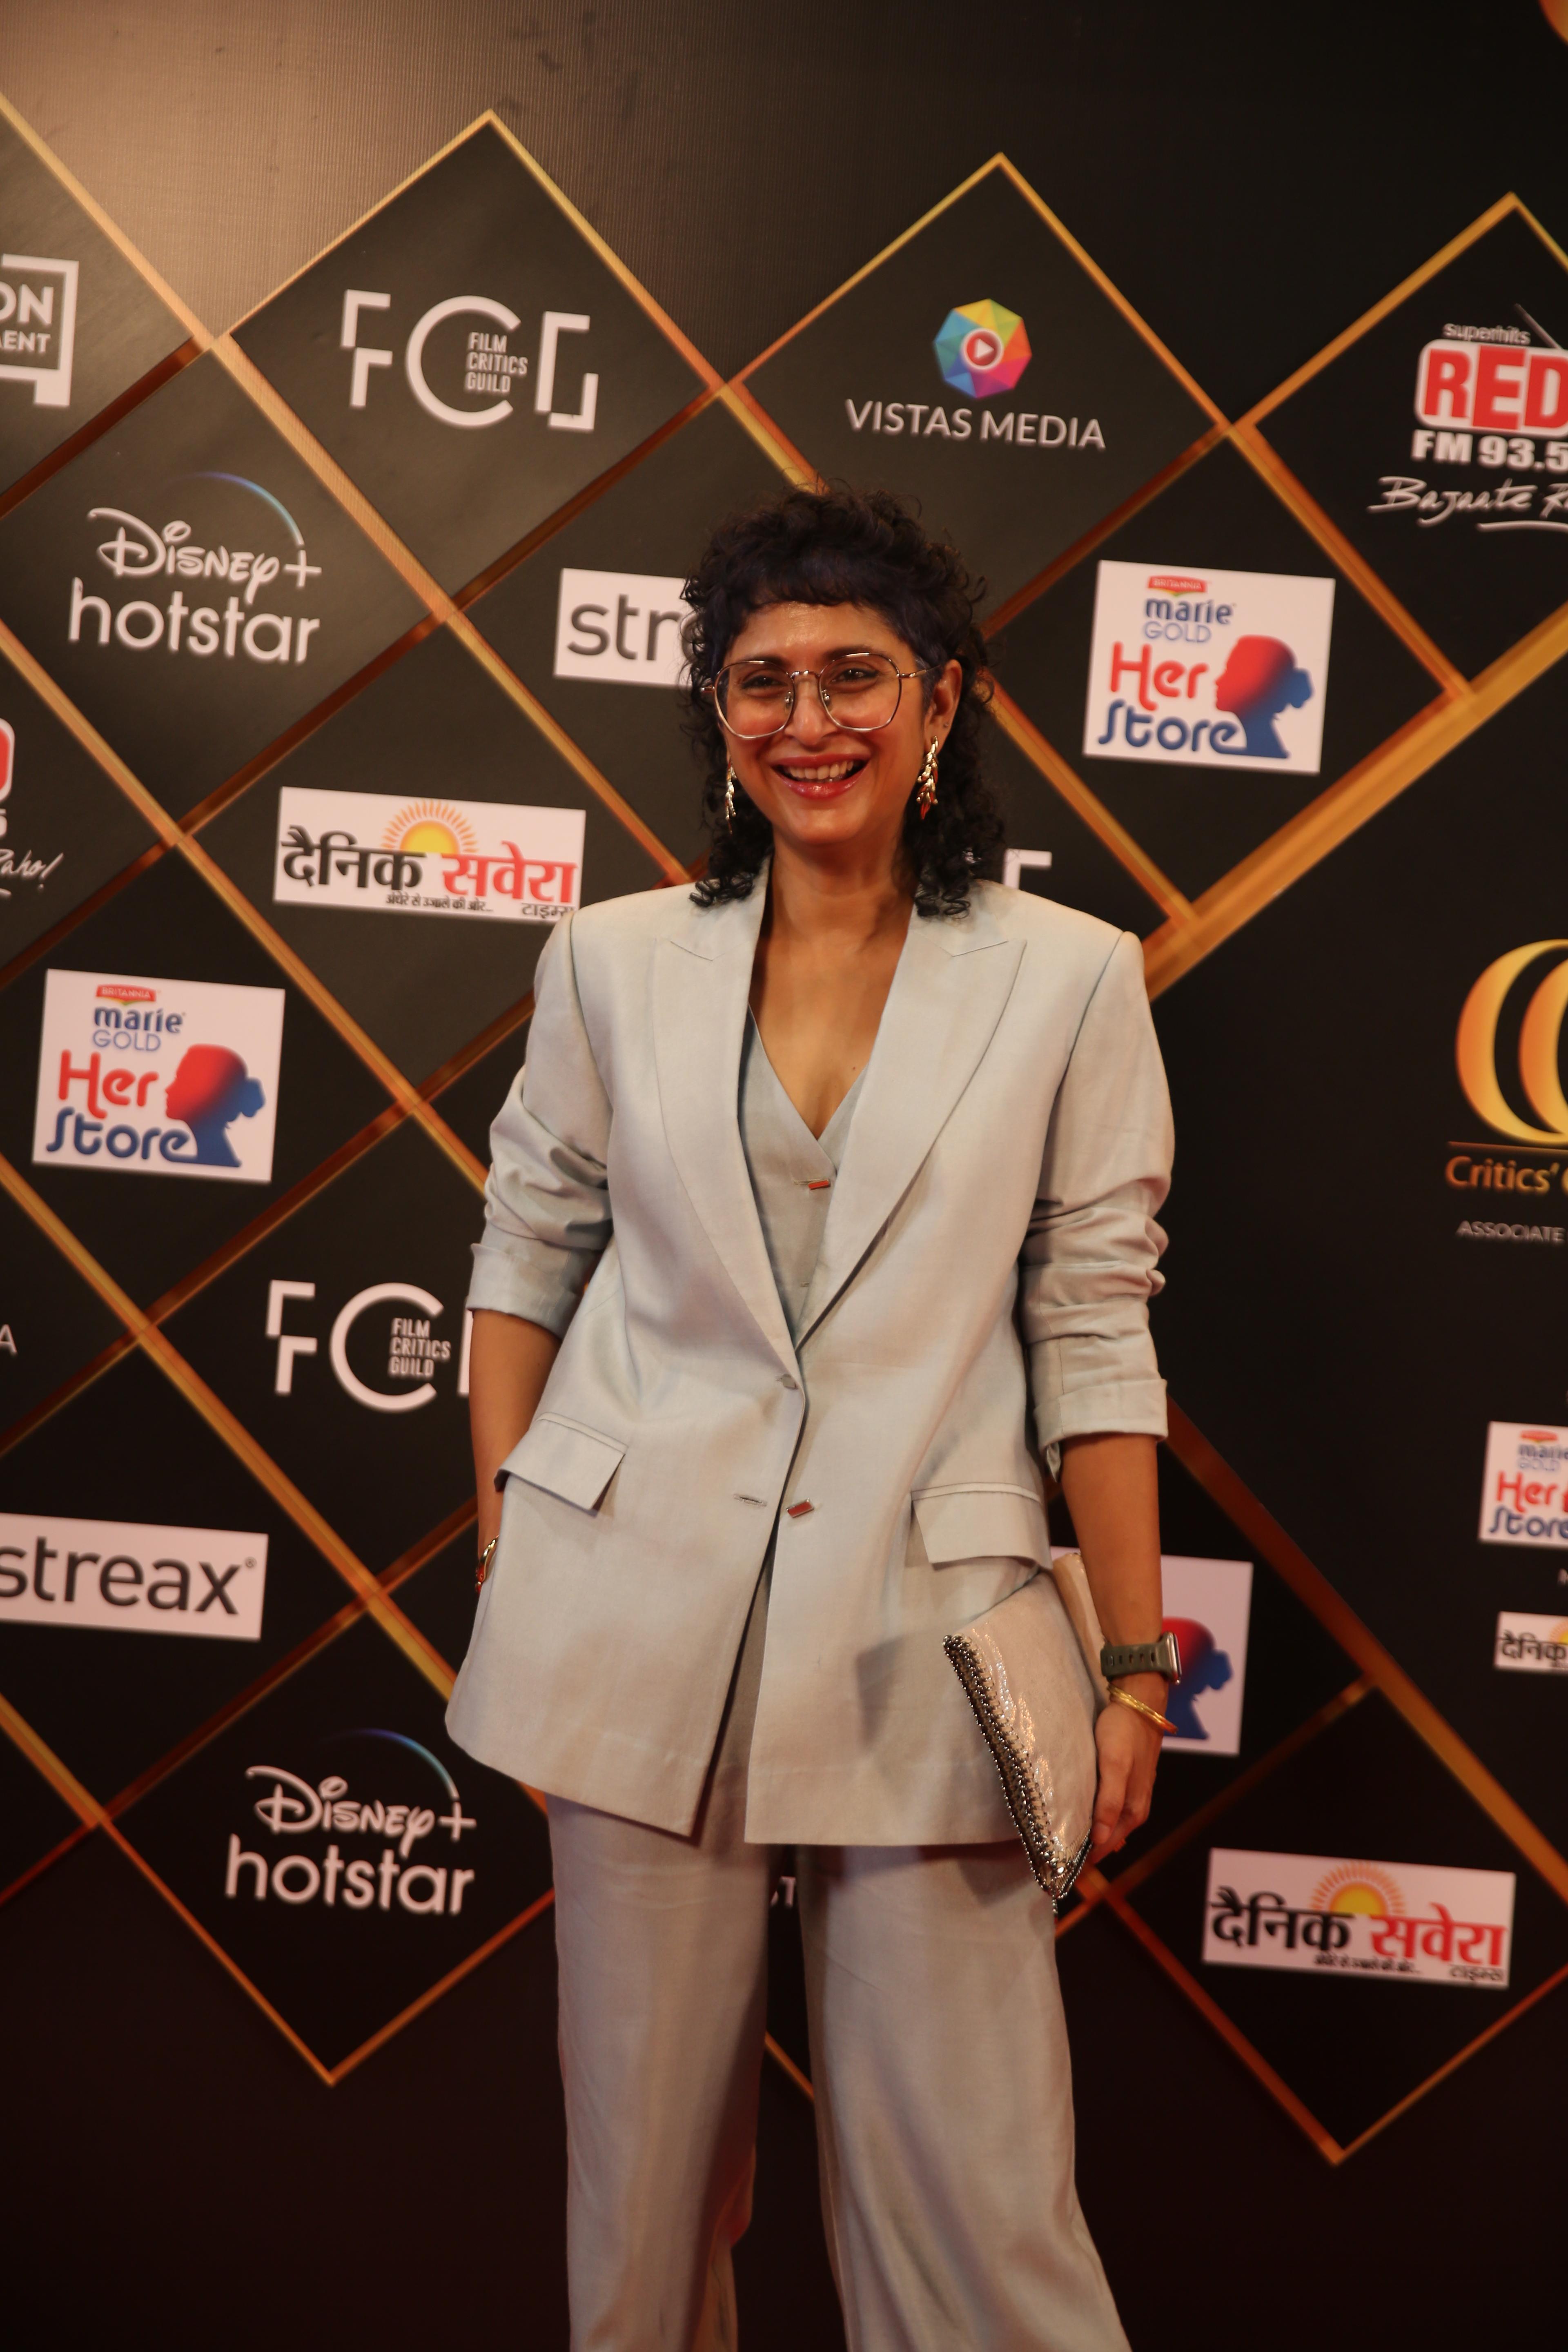 Kiran Rao was exuding boss energy as she posed for the cameras in a power suit